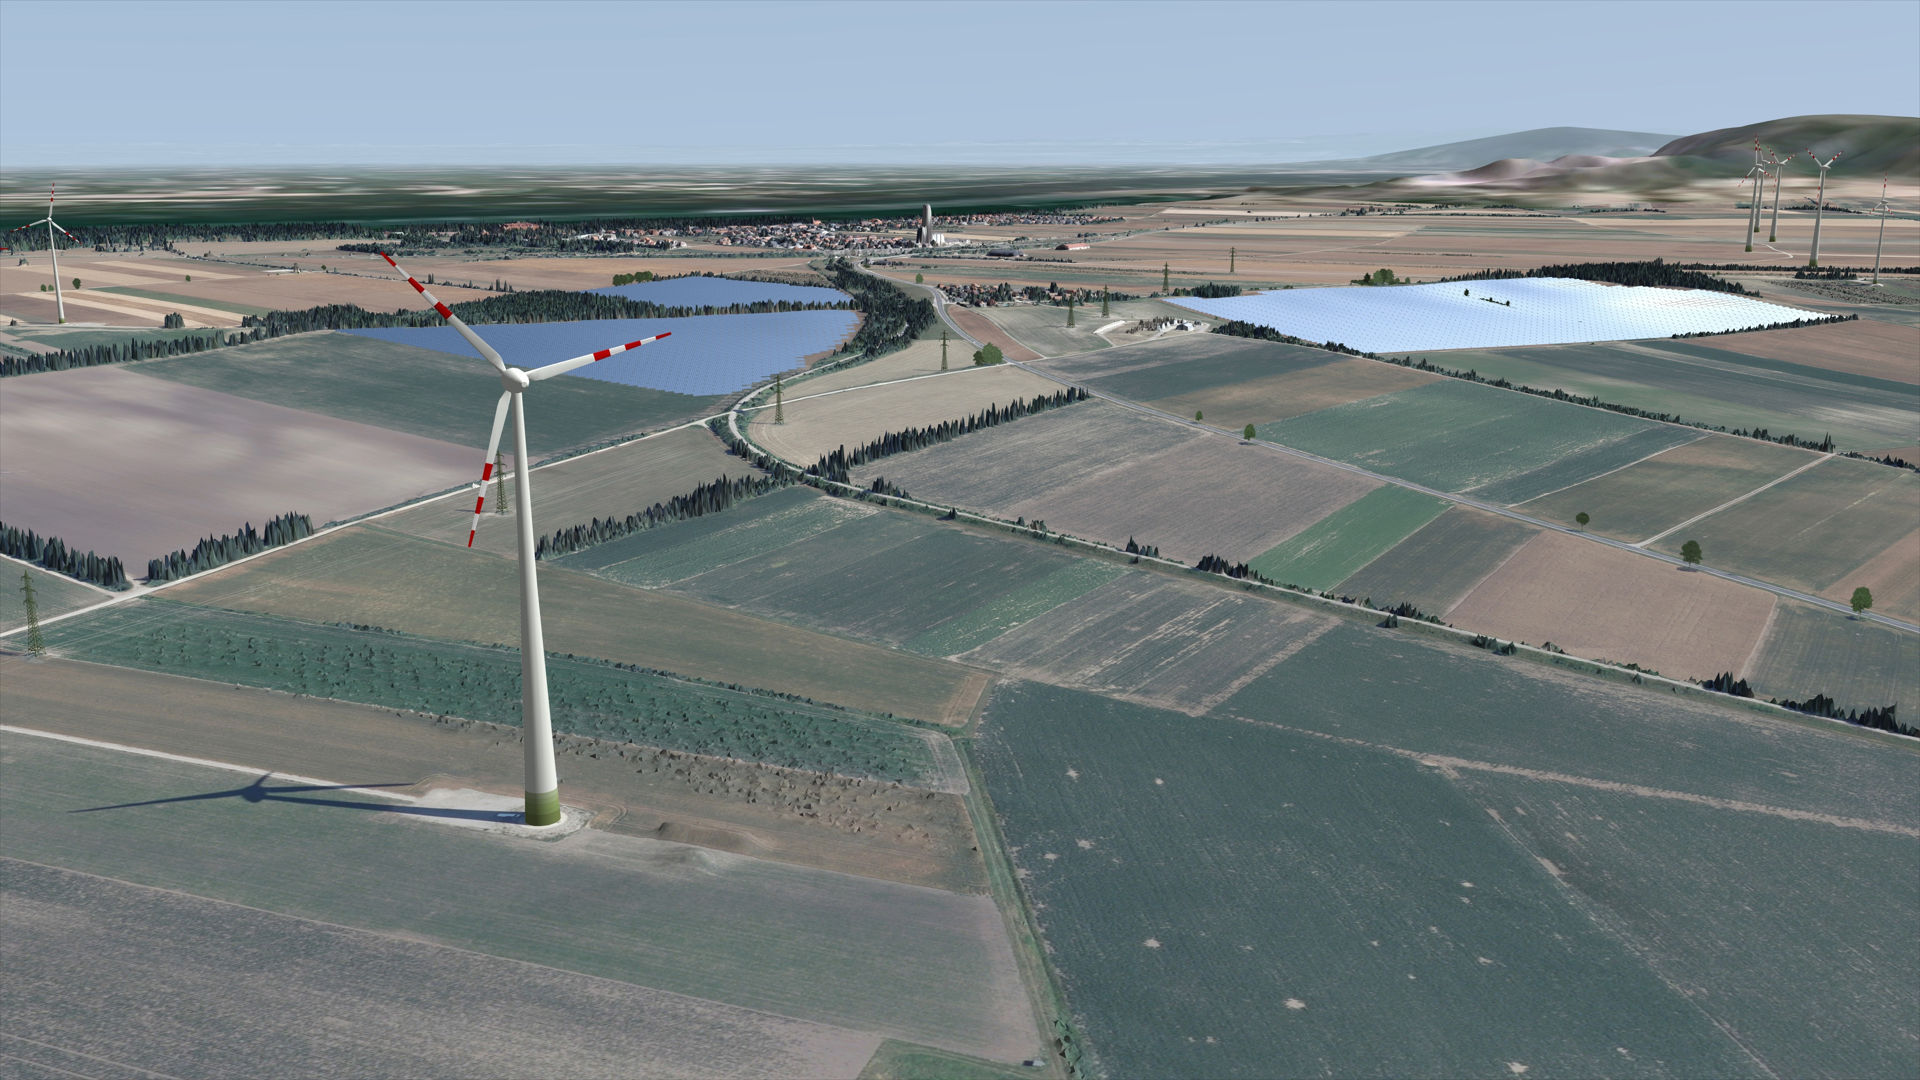 3D visualization of a wind farm with differently colored fields and a large wind turbine in the foreground